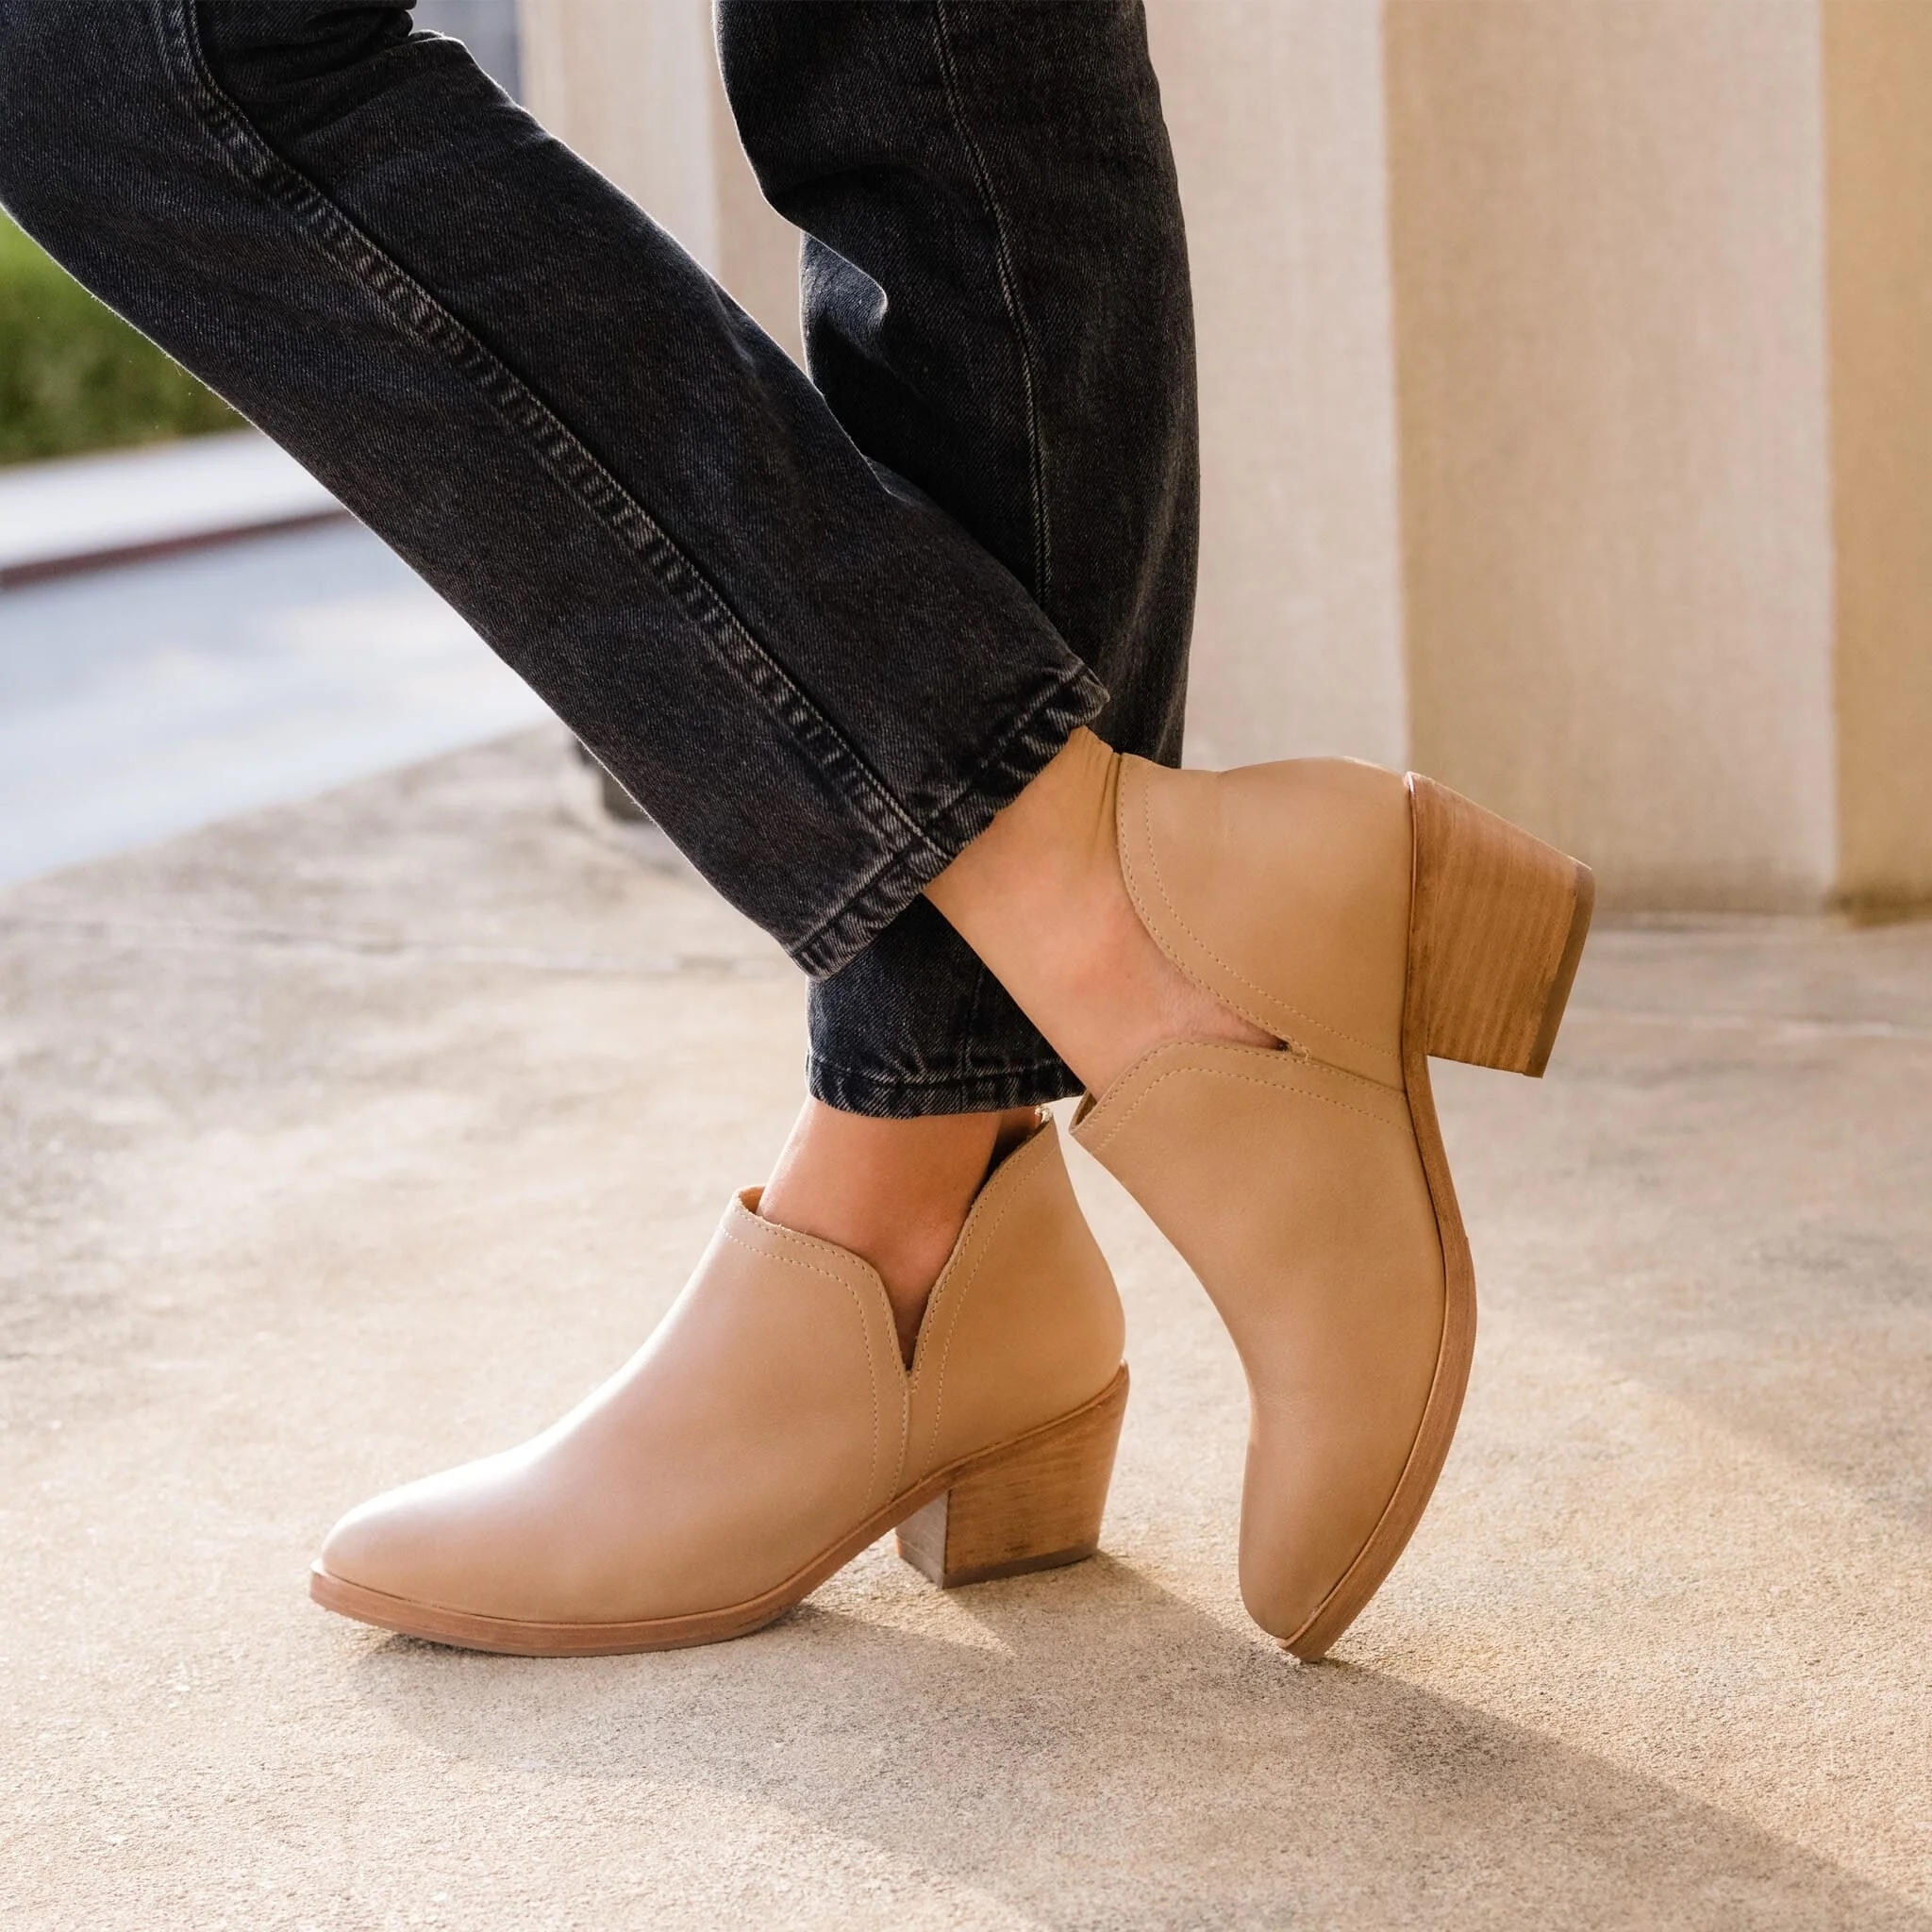 Person wearing beige ankle boots with elastic side panels and wooden block heels, paired with black jeans